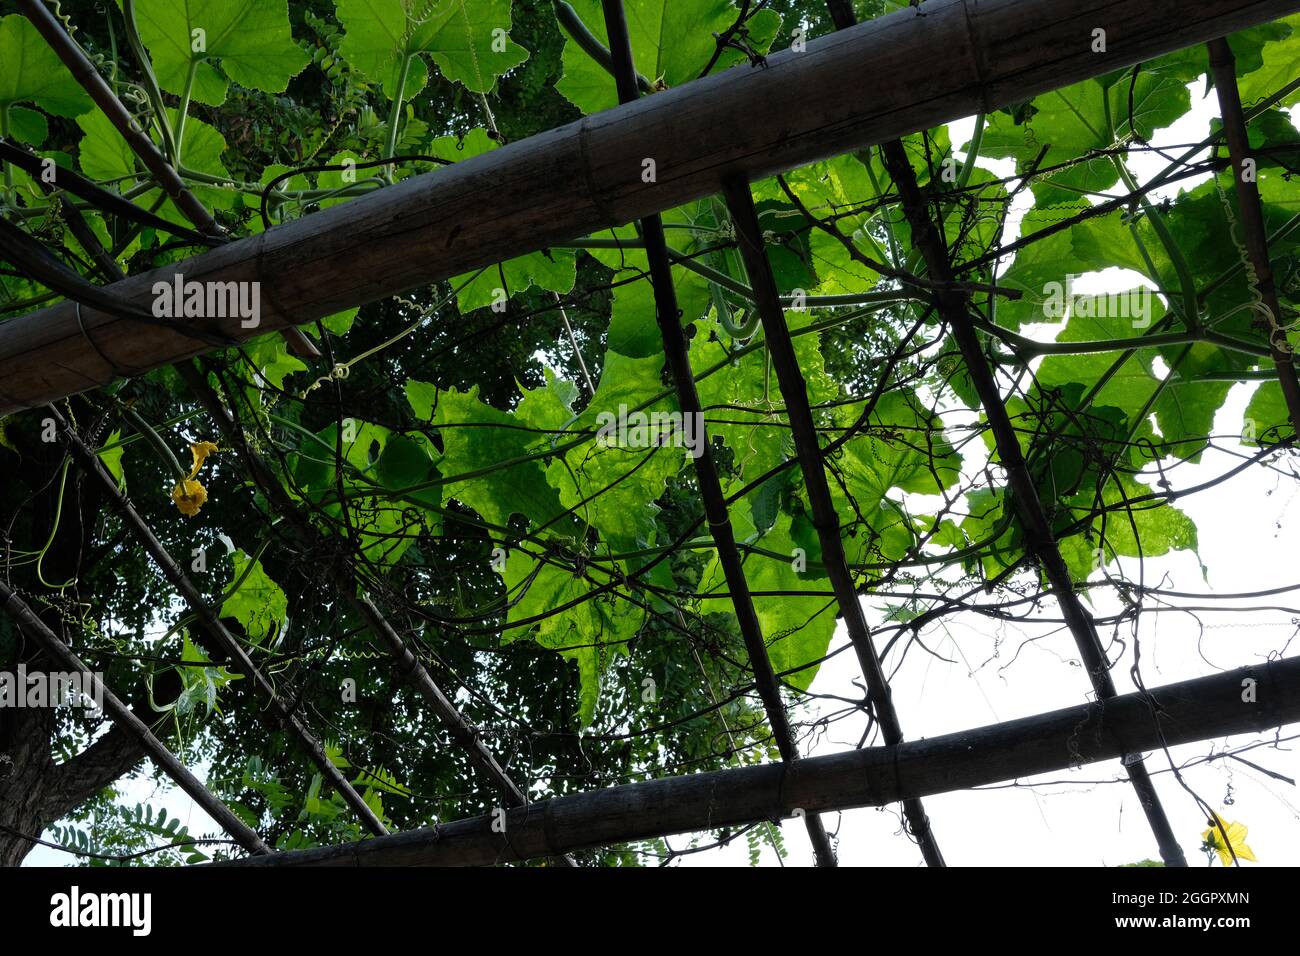 The green vines on the bamboo frame, this quiet and peaceful scene. Stock Photo